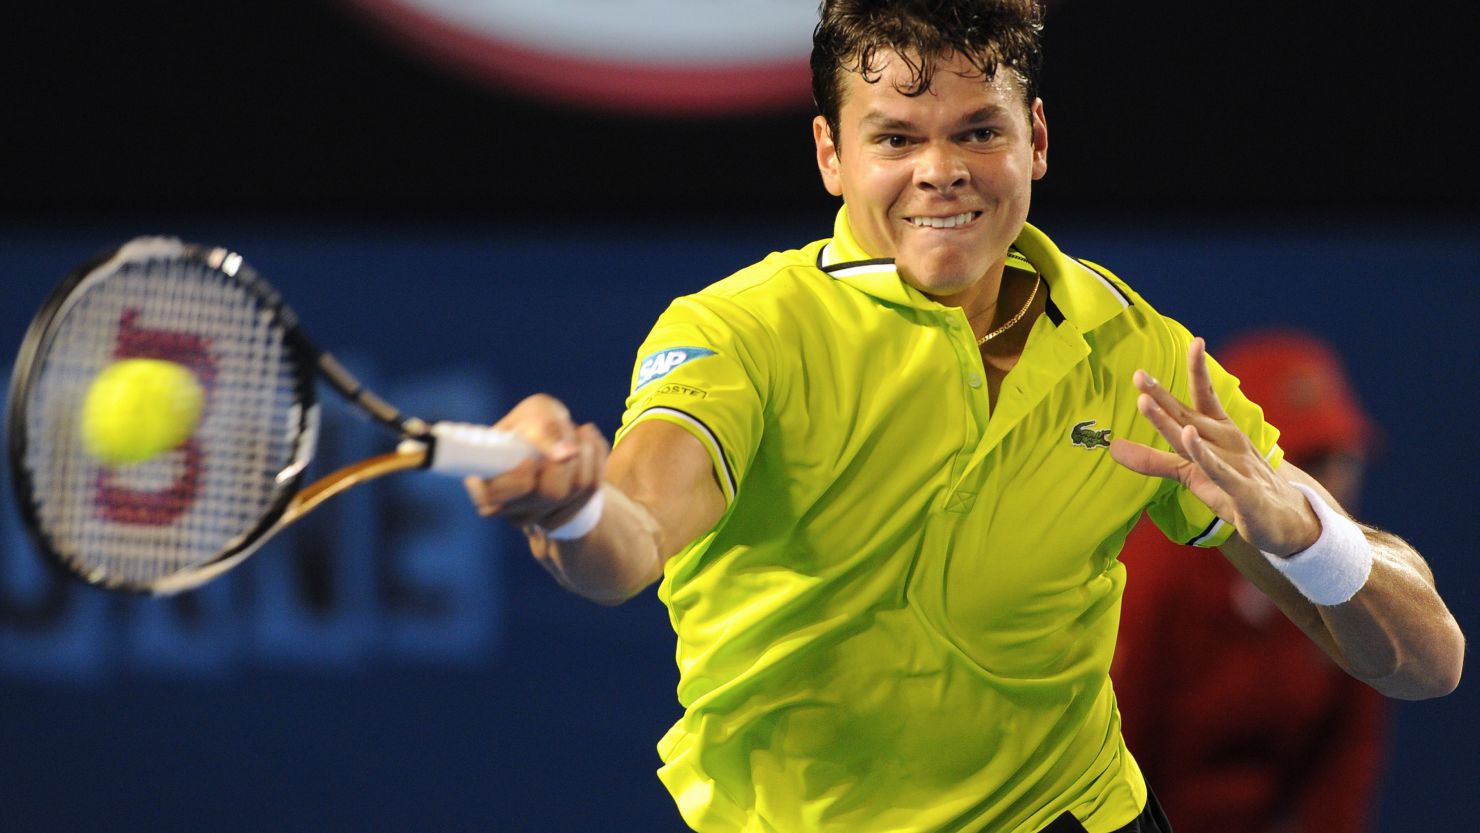 Canada's Milos Raonic successfully defending his SAP Open crown on Sunday.